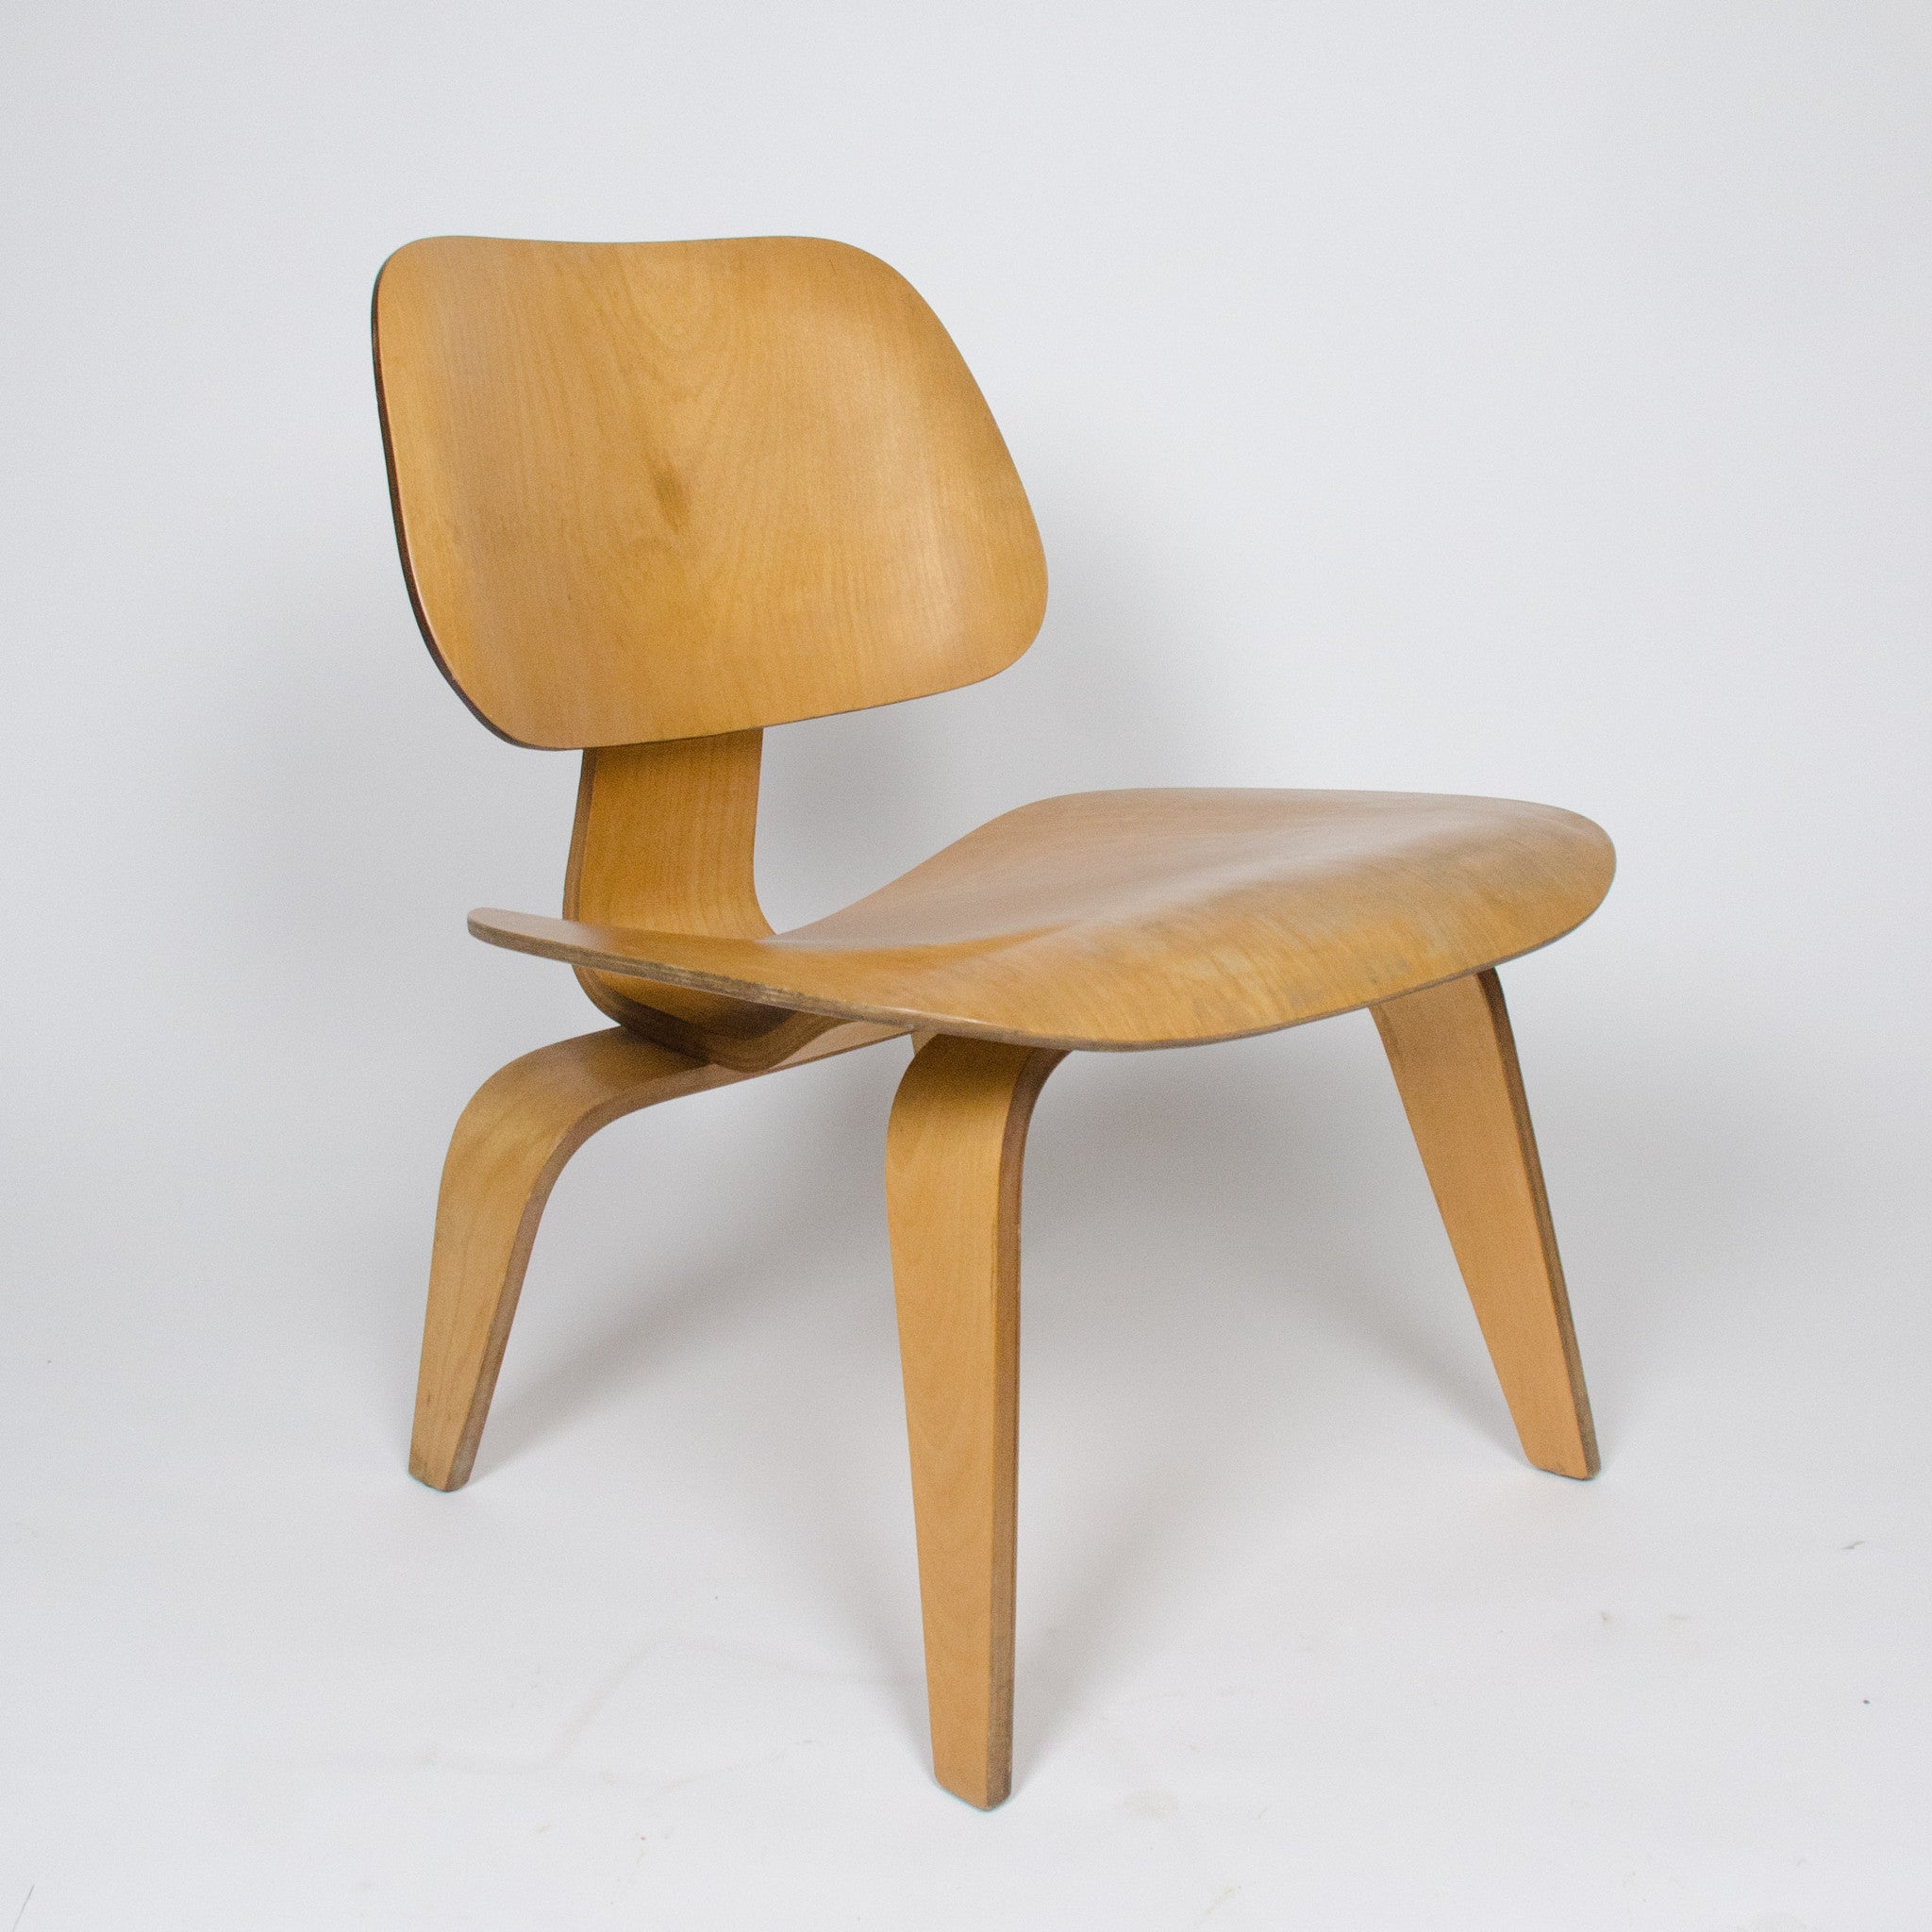 SOLD Eames Herman Miller 1951 LCW Plywood Lounge Chair Original Calico Ash Mint!